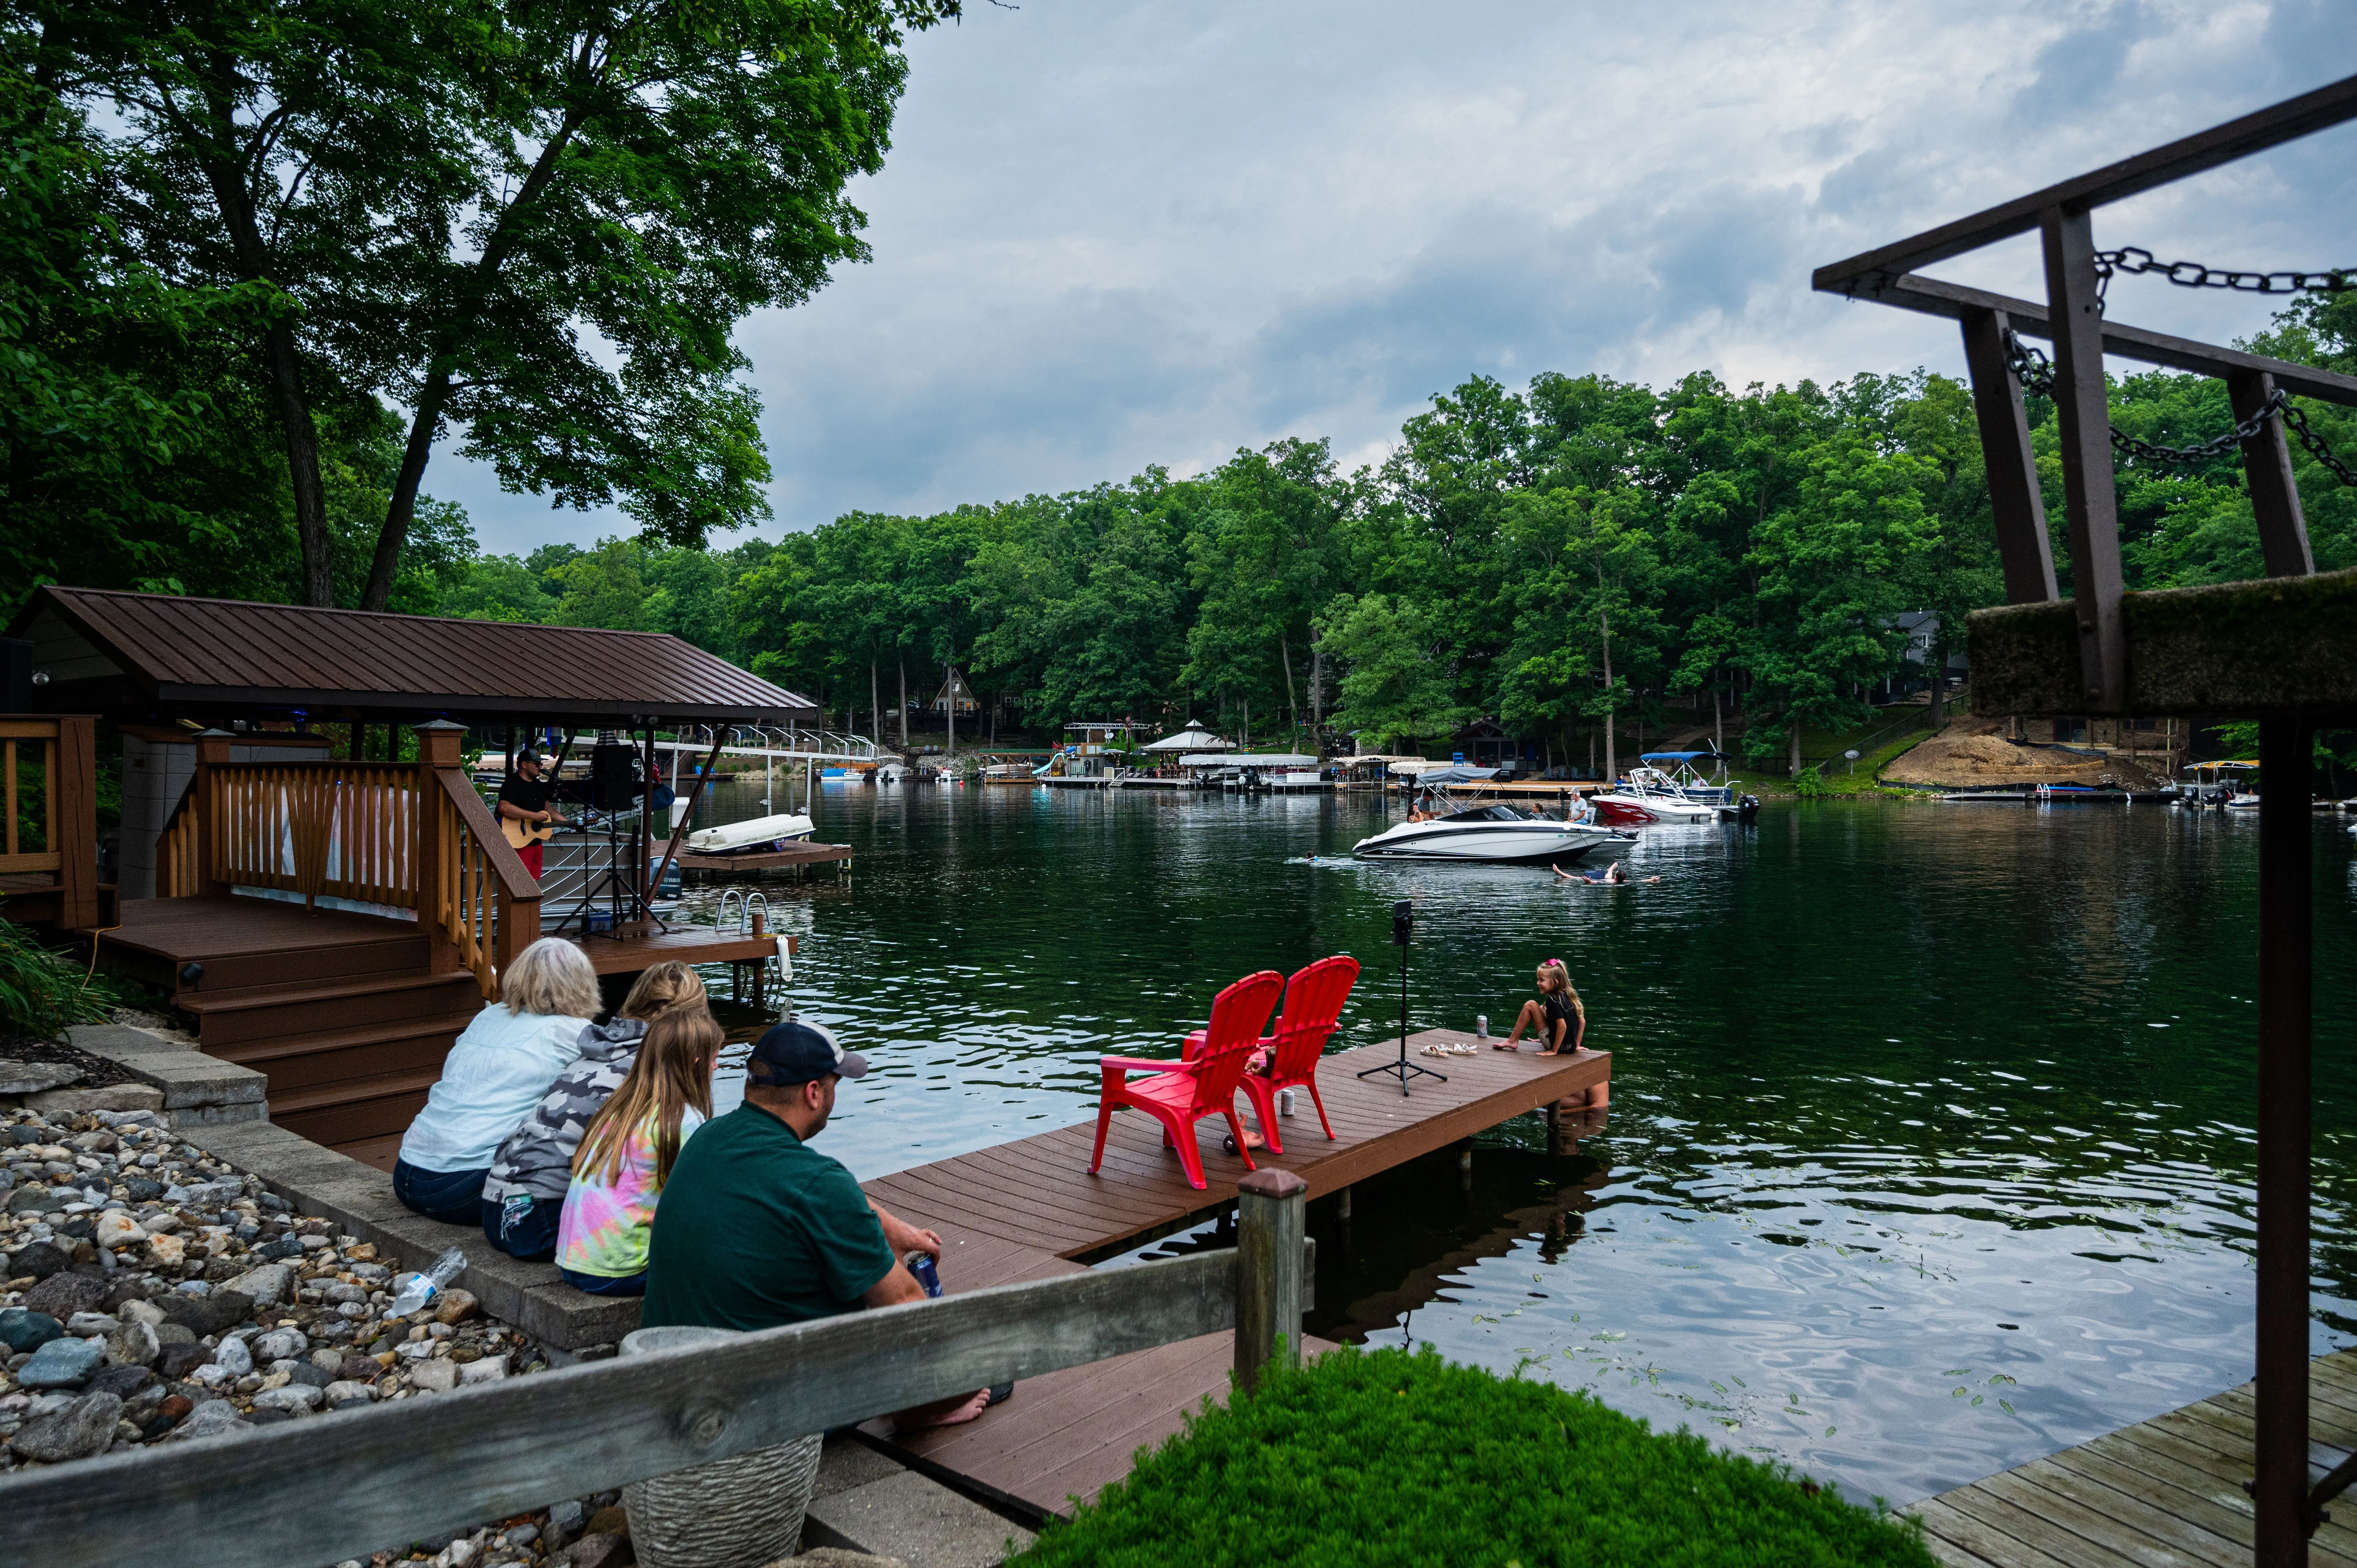 People relaxing by a calm lake with a dock, boats, and forested shores, capturing a serene atmosphere.